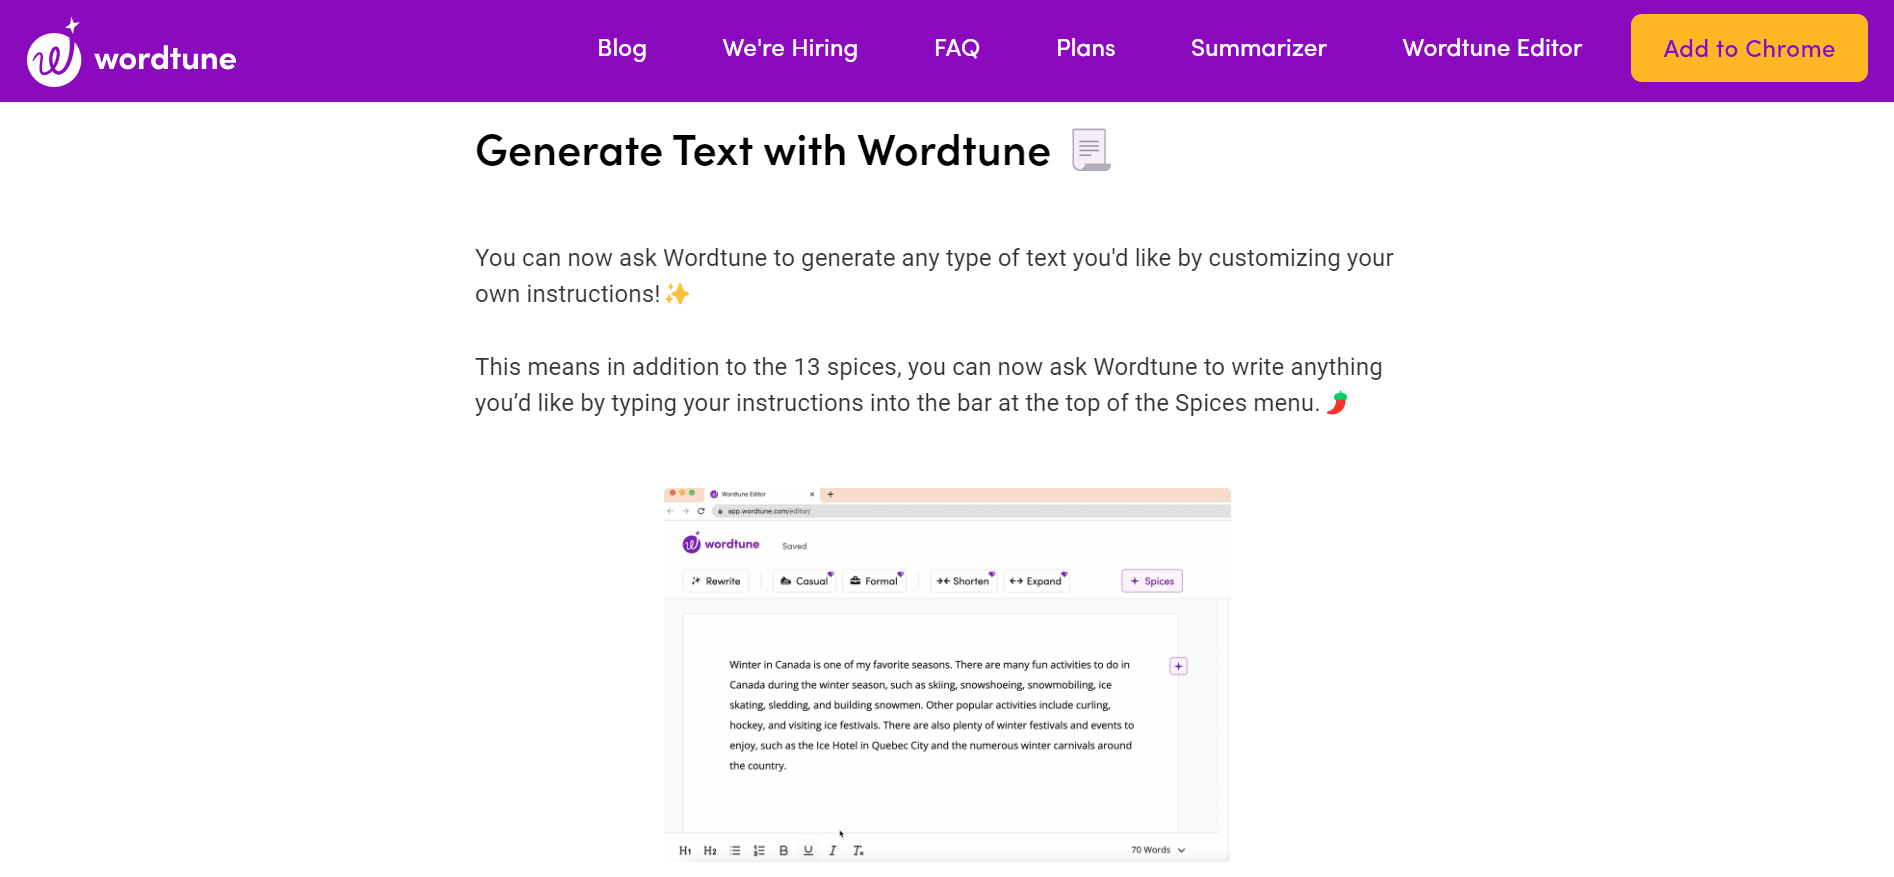 Wordtune Information Page - Generate Text with Wordtune